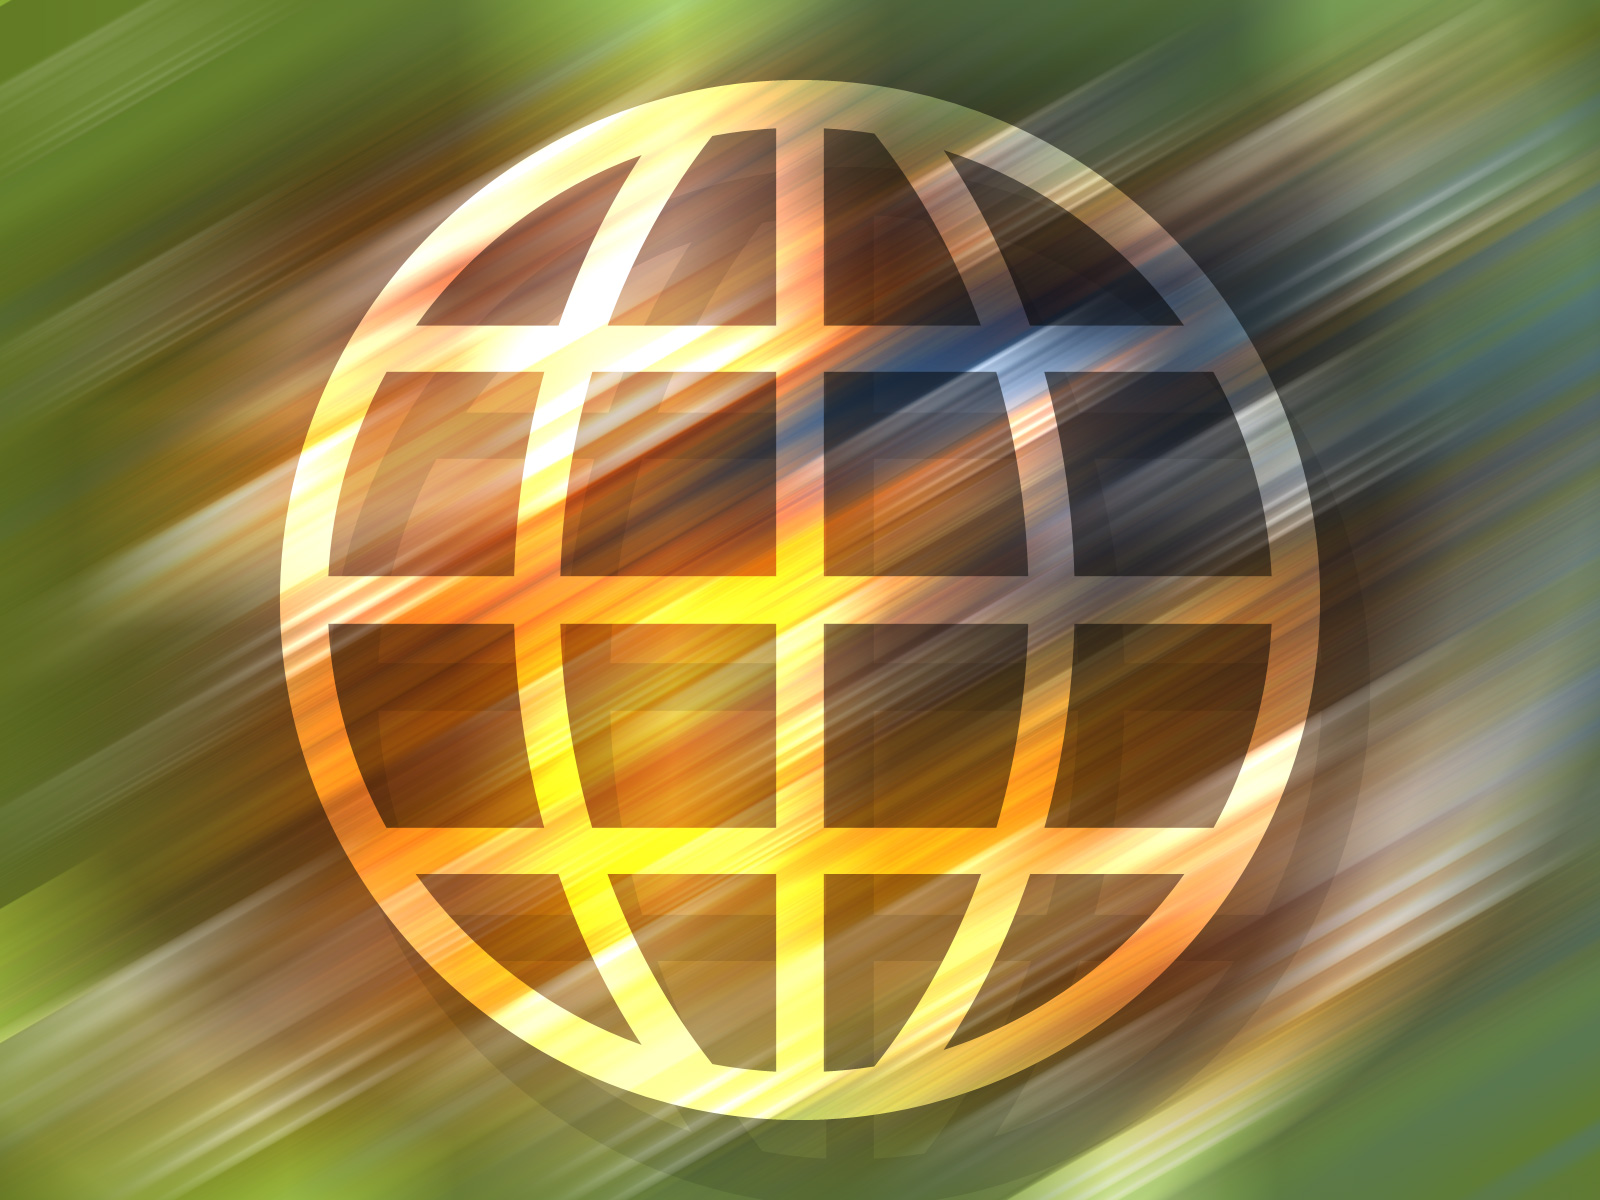 Globe symbol on green and brown background